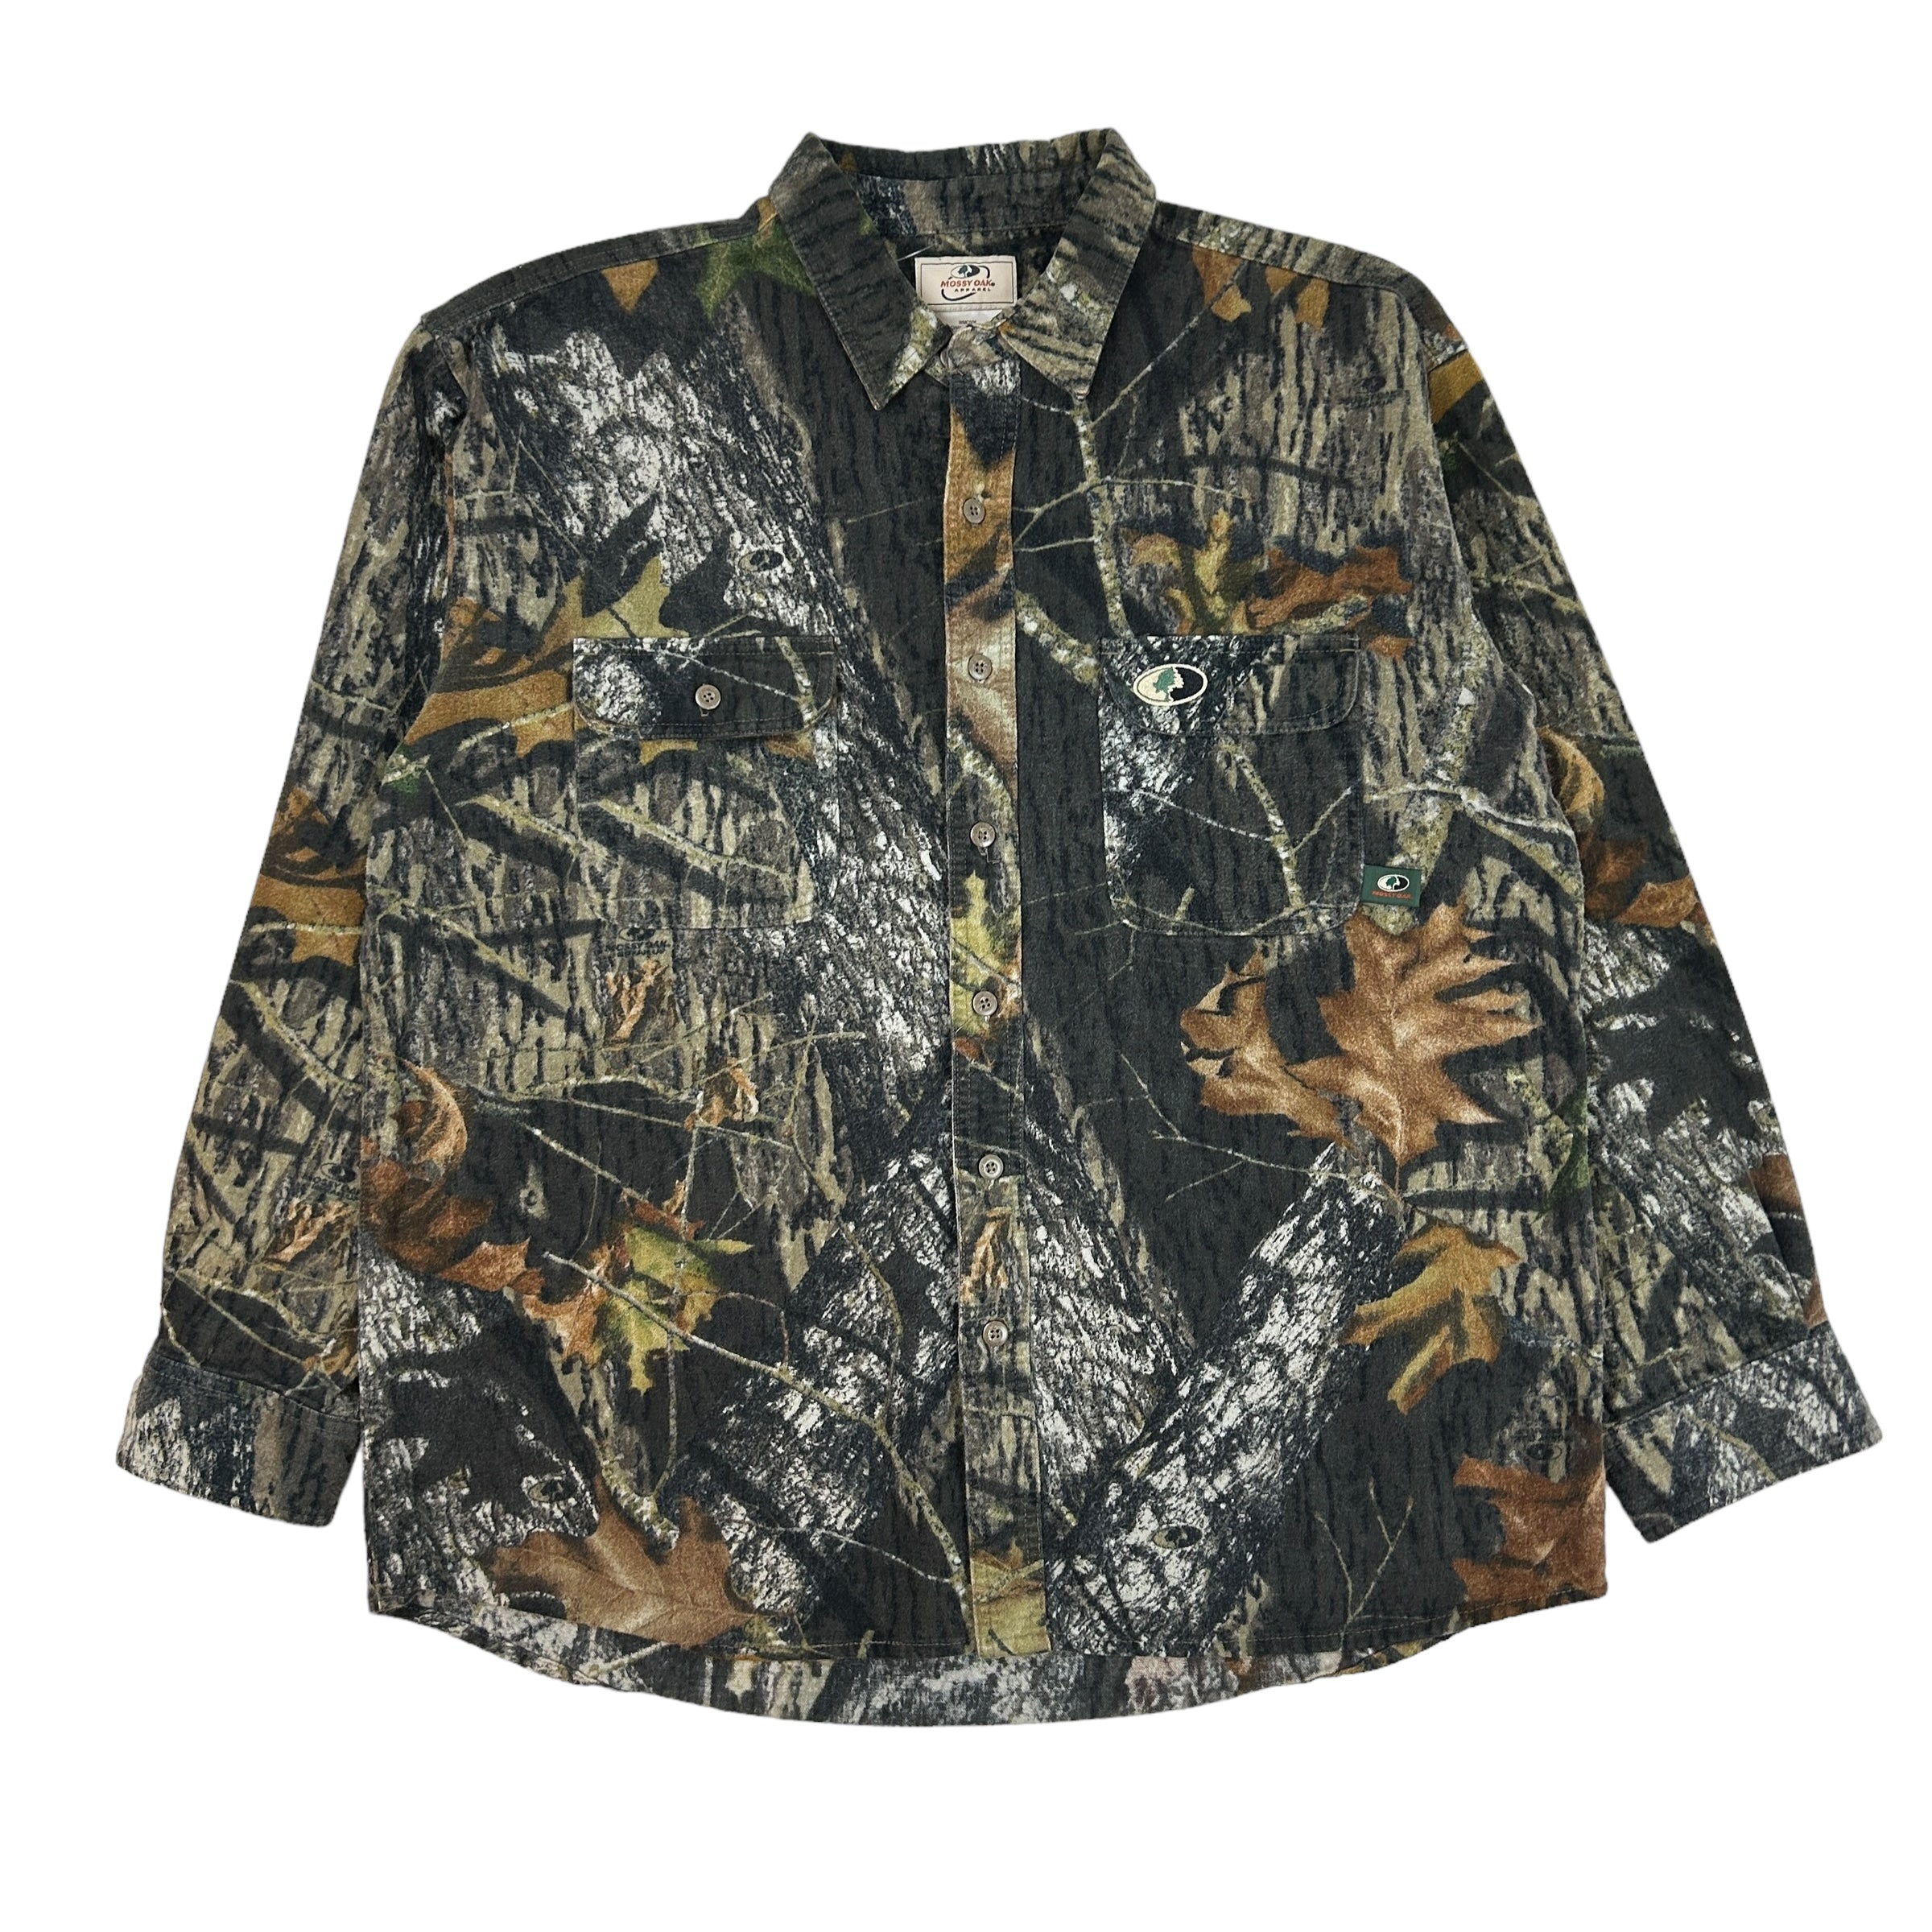 Vintage Mossy Oak RealTree Button Up